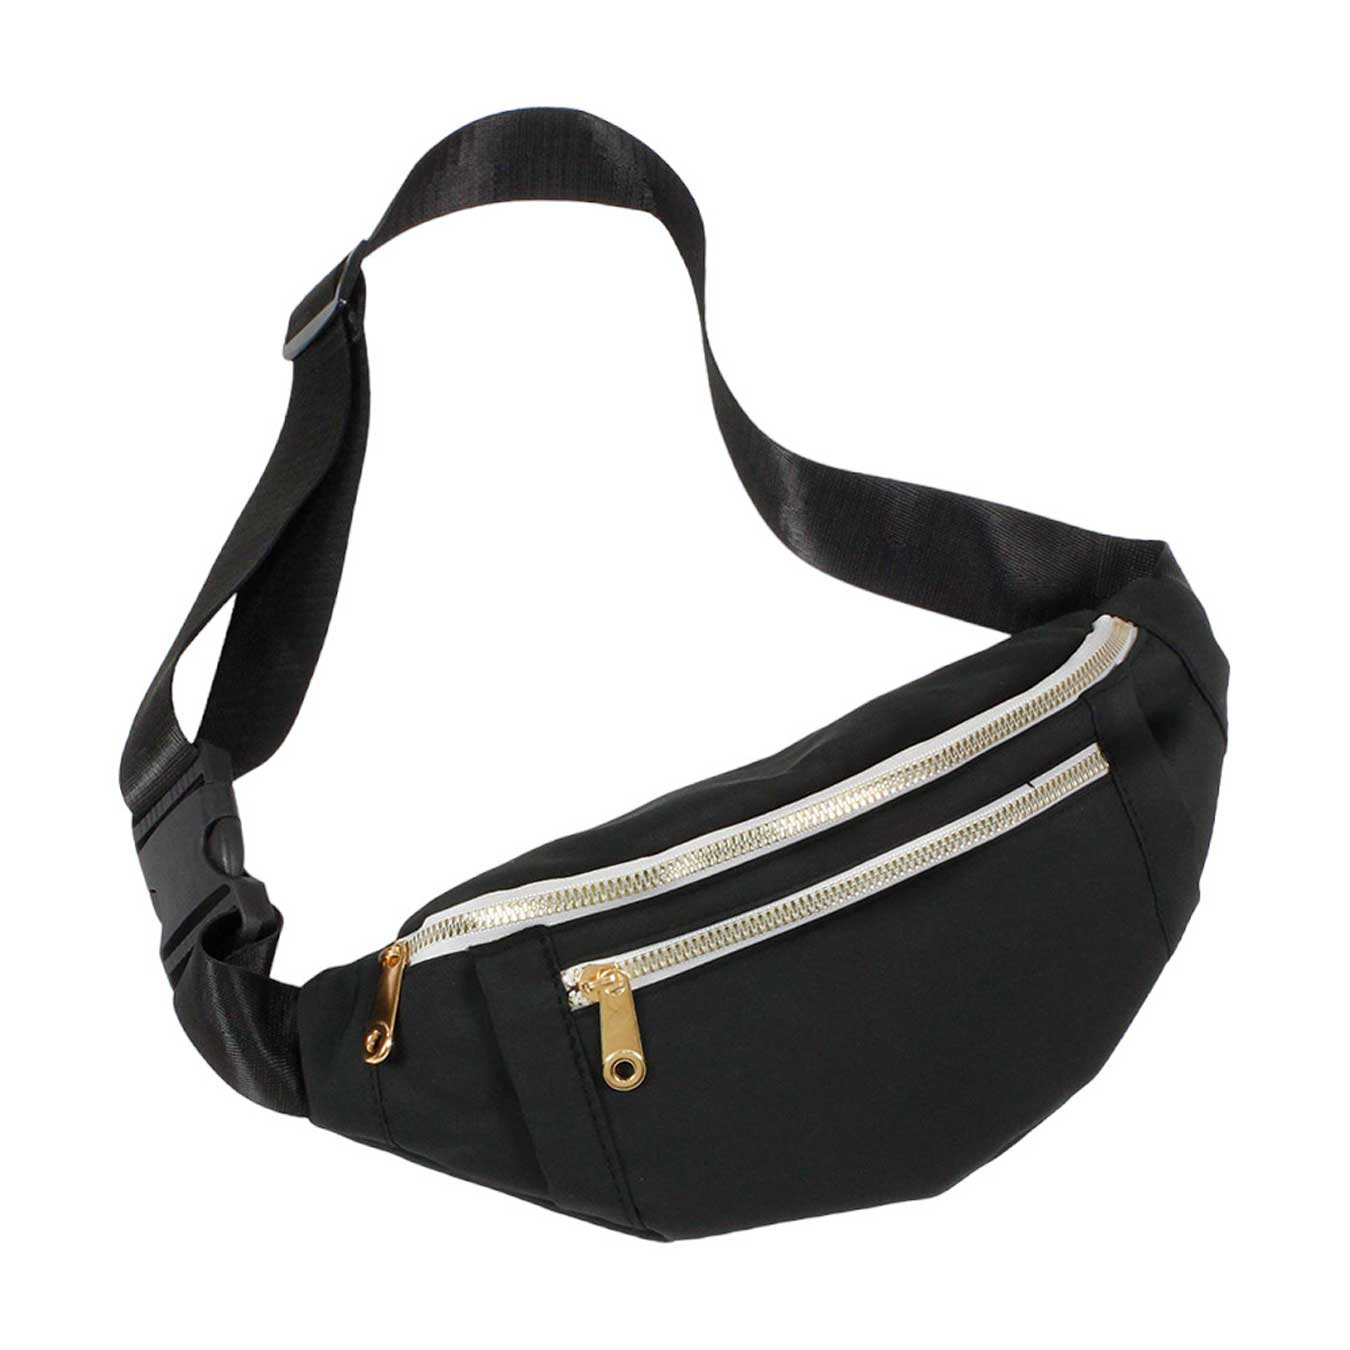 Beige Contrast Zipper Detailed Sling Bag Fanny Pack Belt Bag, make yourself stand out & be the ultimate fashionista while carrying this beautiful Detailed sling bag. Great for when you need something small to carry or drop in your bag. Keep your keys handy & ready for opening doors as soon as you arrive.  